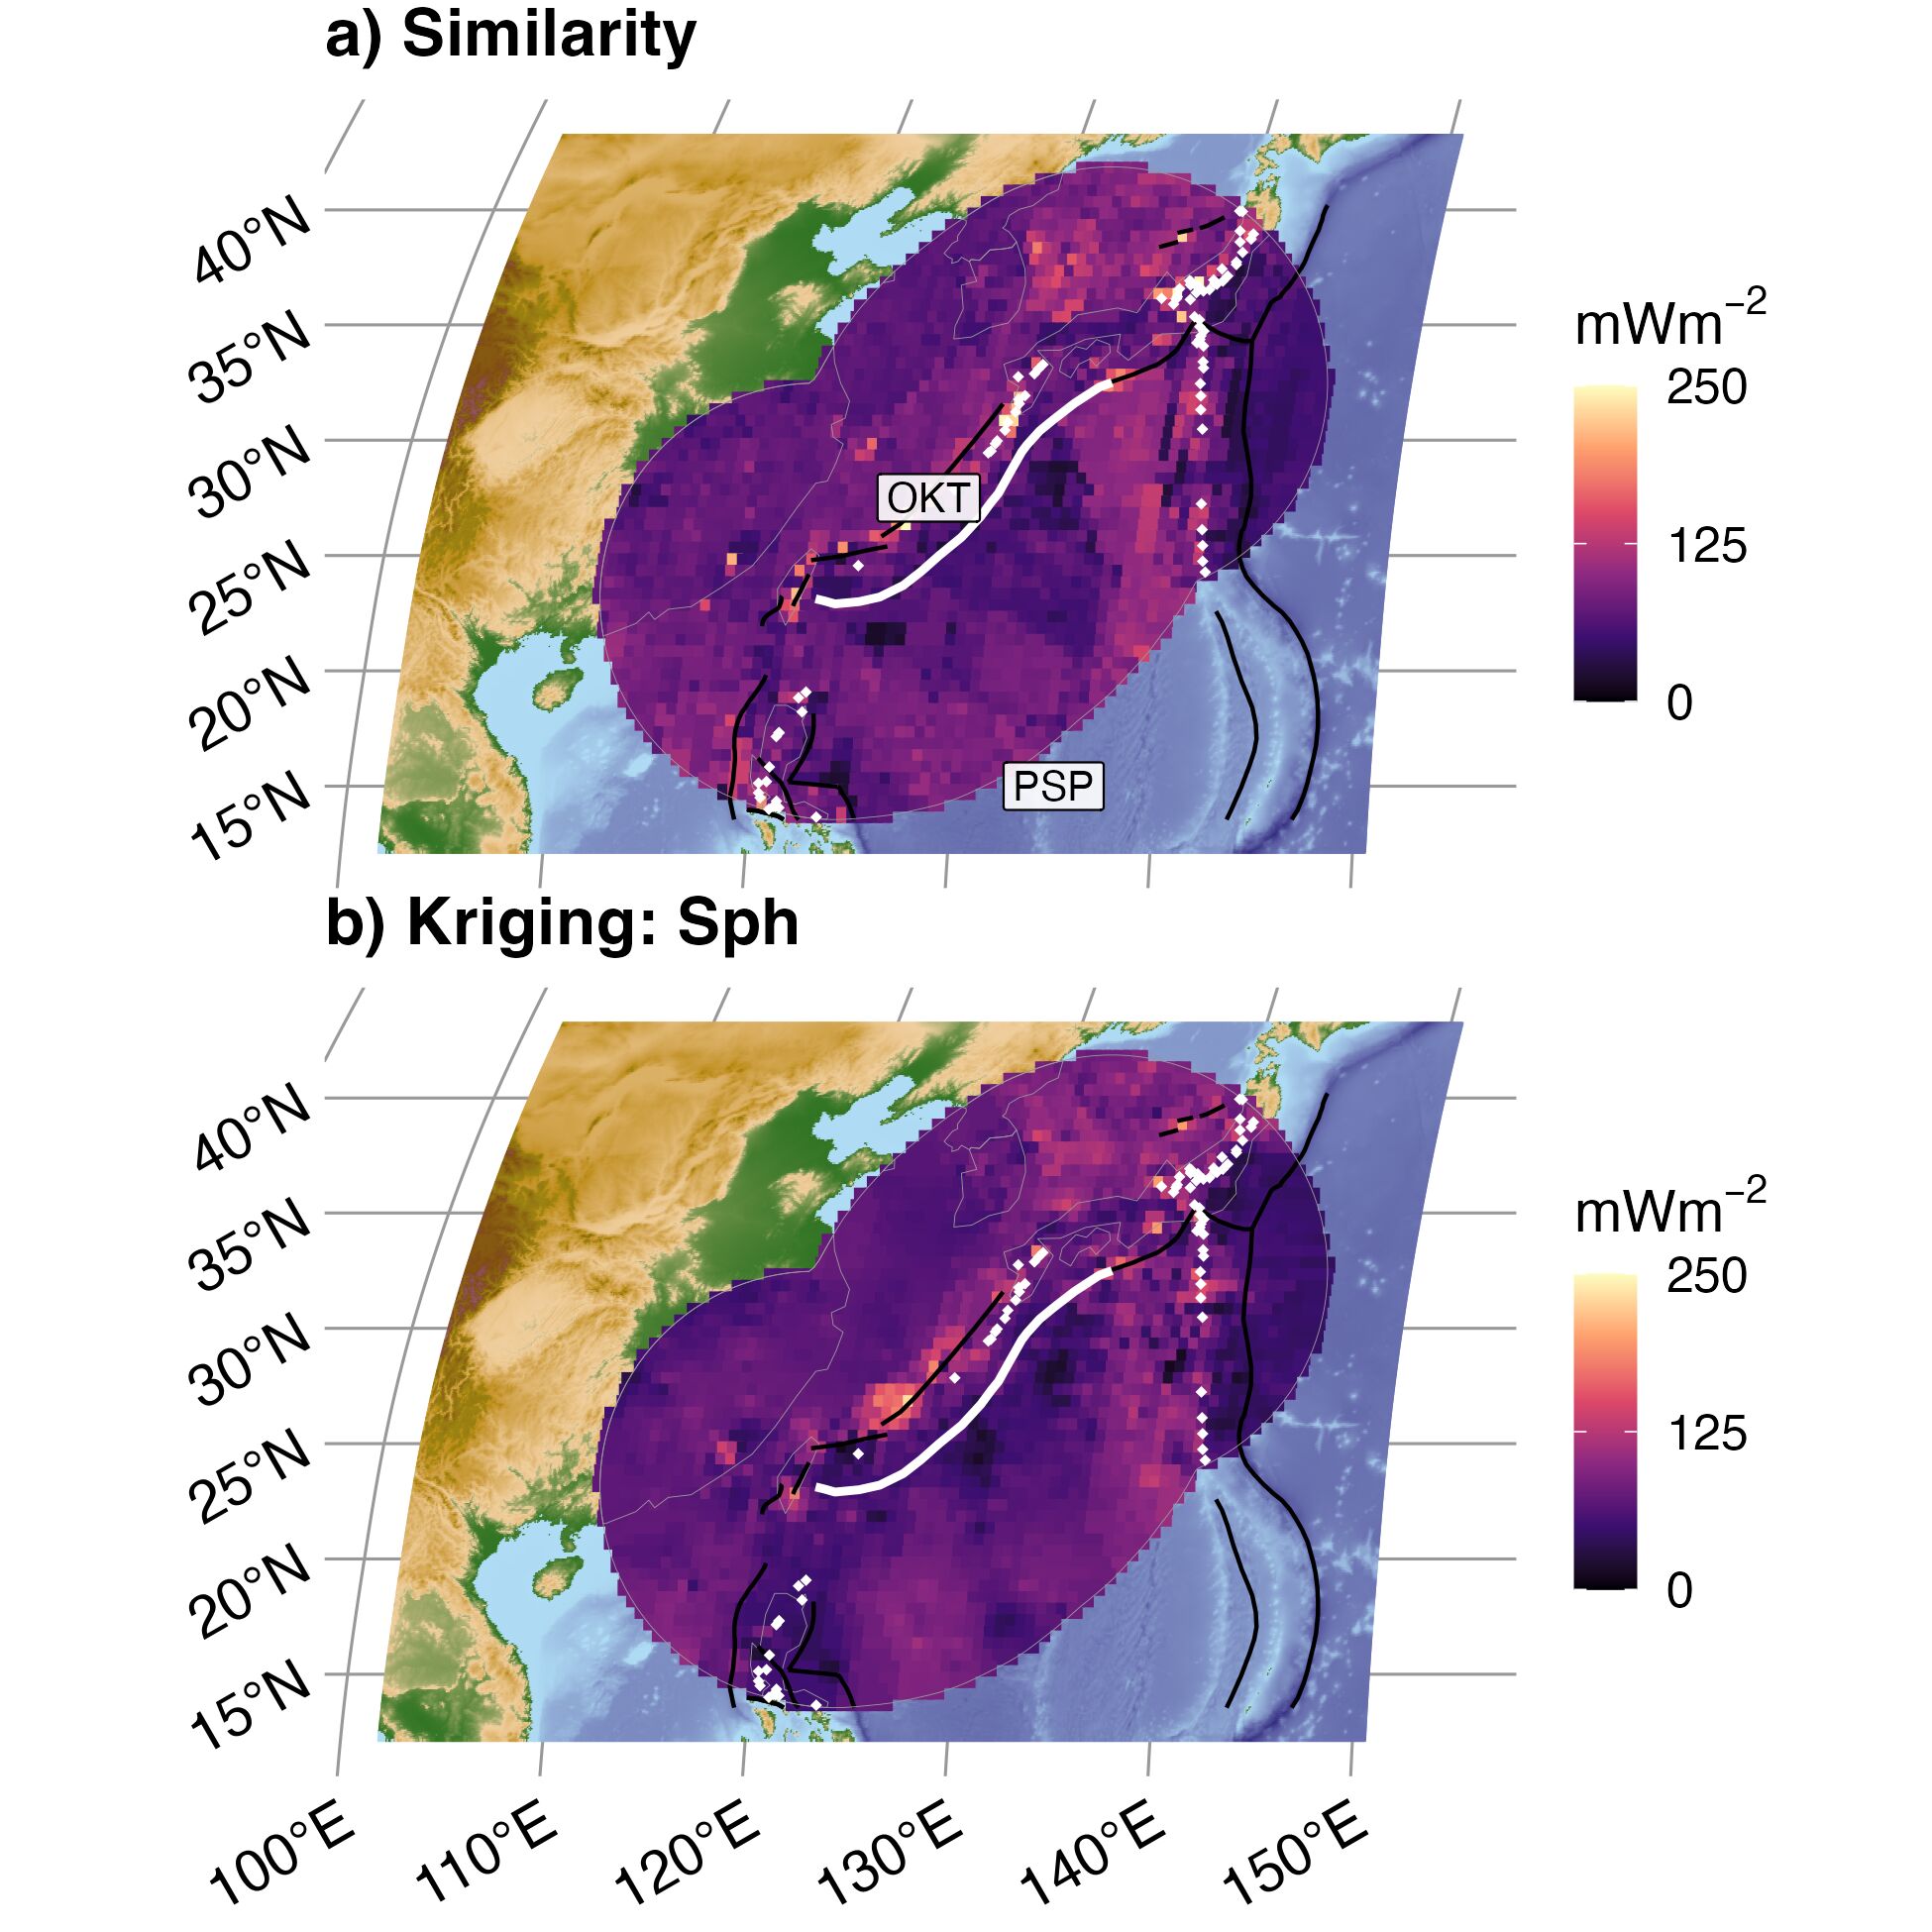 Similarity and Kriging interpolations for Kyushyu Ryukyu. (a) Similarity predicts a textured interpolation that is strongly influenced by multiple volcanic chains along the margins of the Philippine Sea Plate (PSP), contrasting oceanic plate ages, and active rifting in the Okinawa trough (OKT). (b) The Kriging interpolation is generally smoother, but corroborates much of the same texture predicted by Similarity due to relatively high observational density and regularity of observational coverage throughout the domain. Segment boundary (bold white line) and volcanoes (gold diamonds) defined by Syracuse & Abers (2006). Similarity interpolation from Lucazeau (2019). Plate boundaries (bold black lines) defined by Lawver et al. (2018).